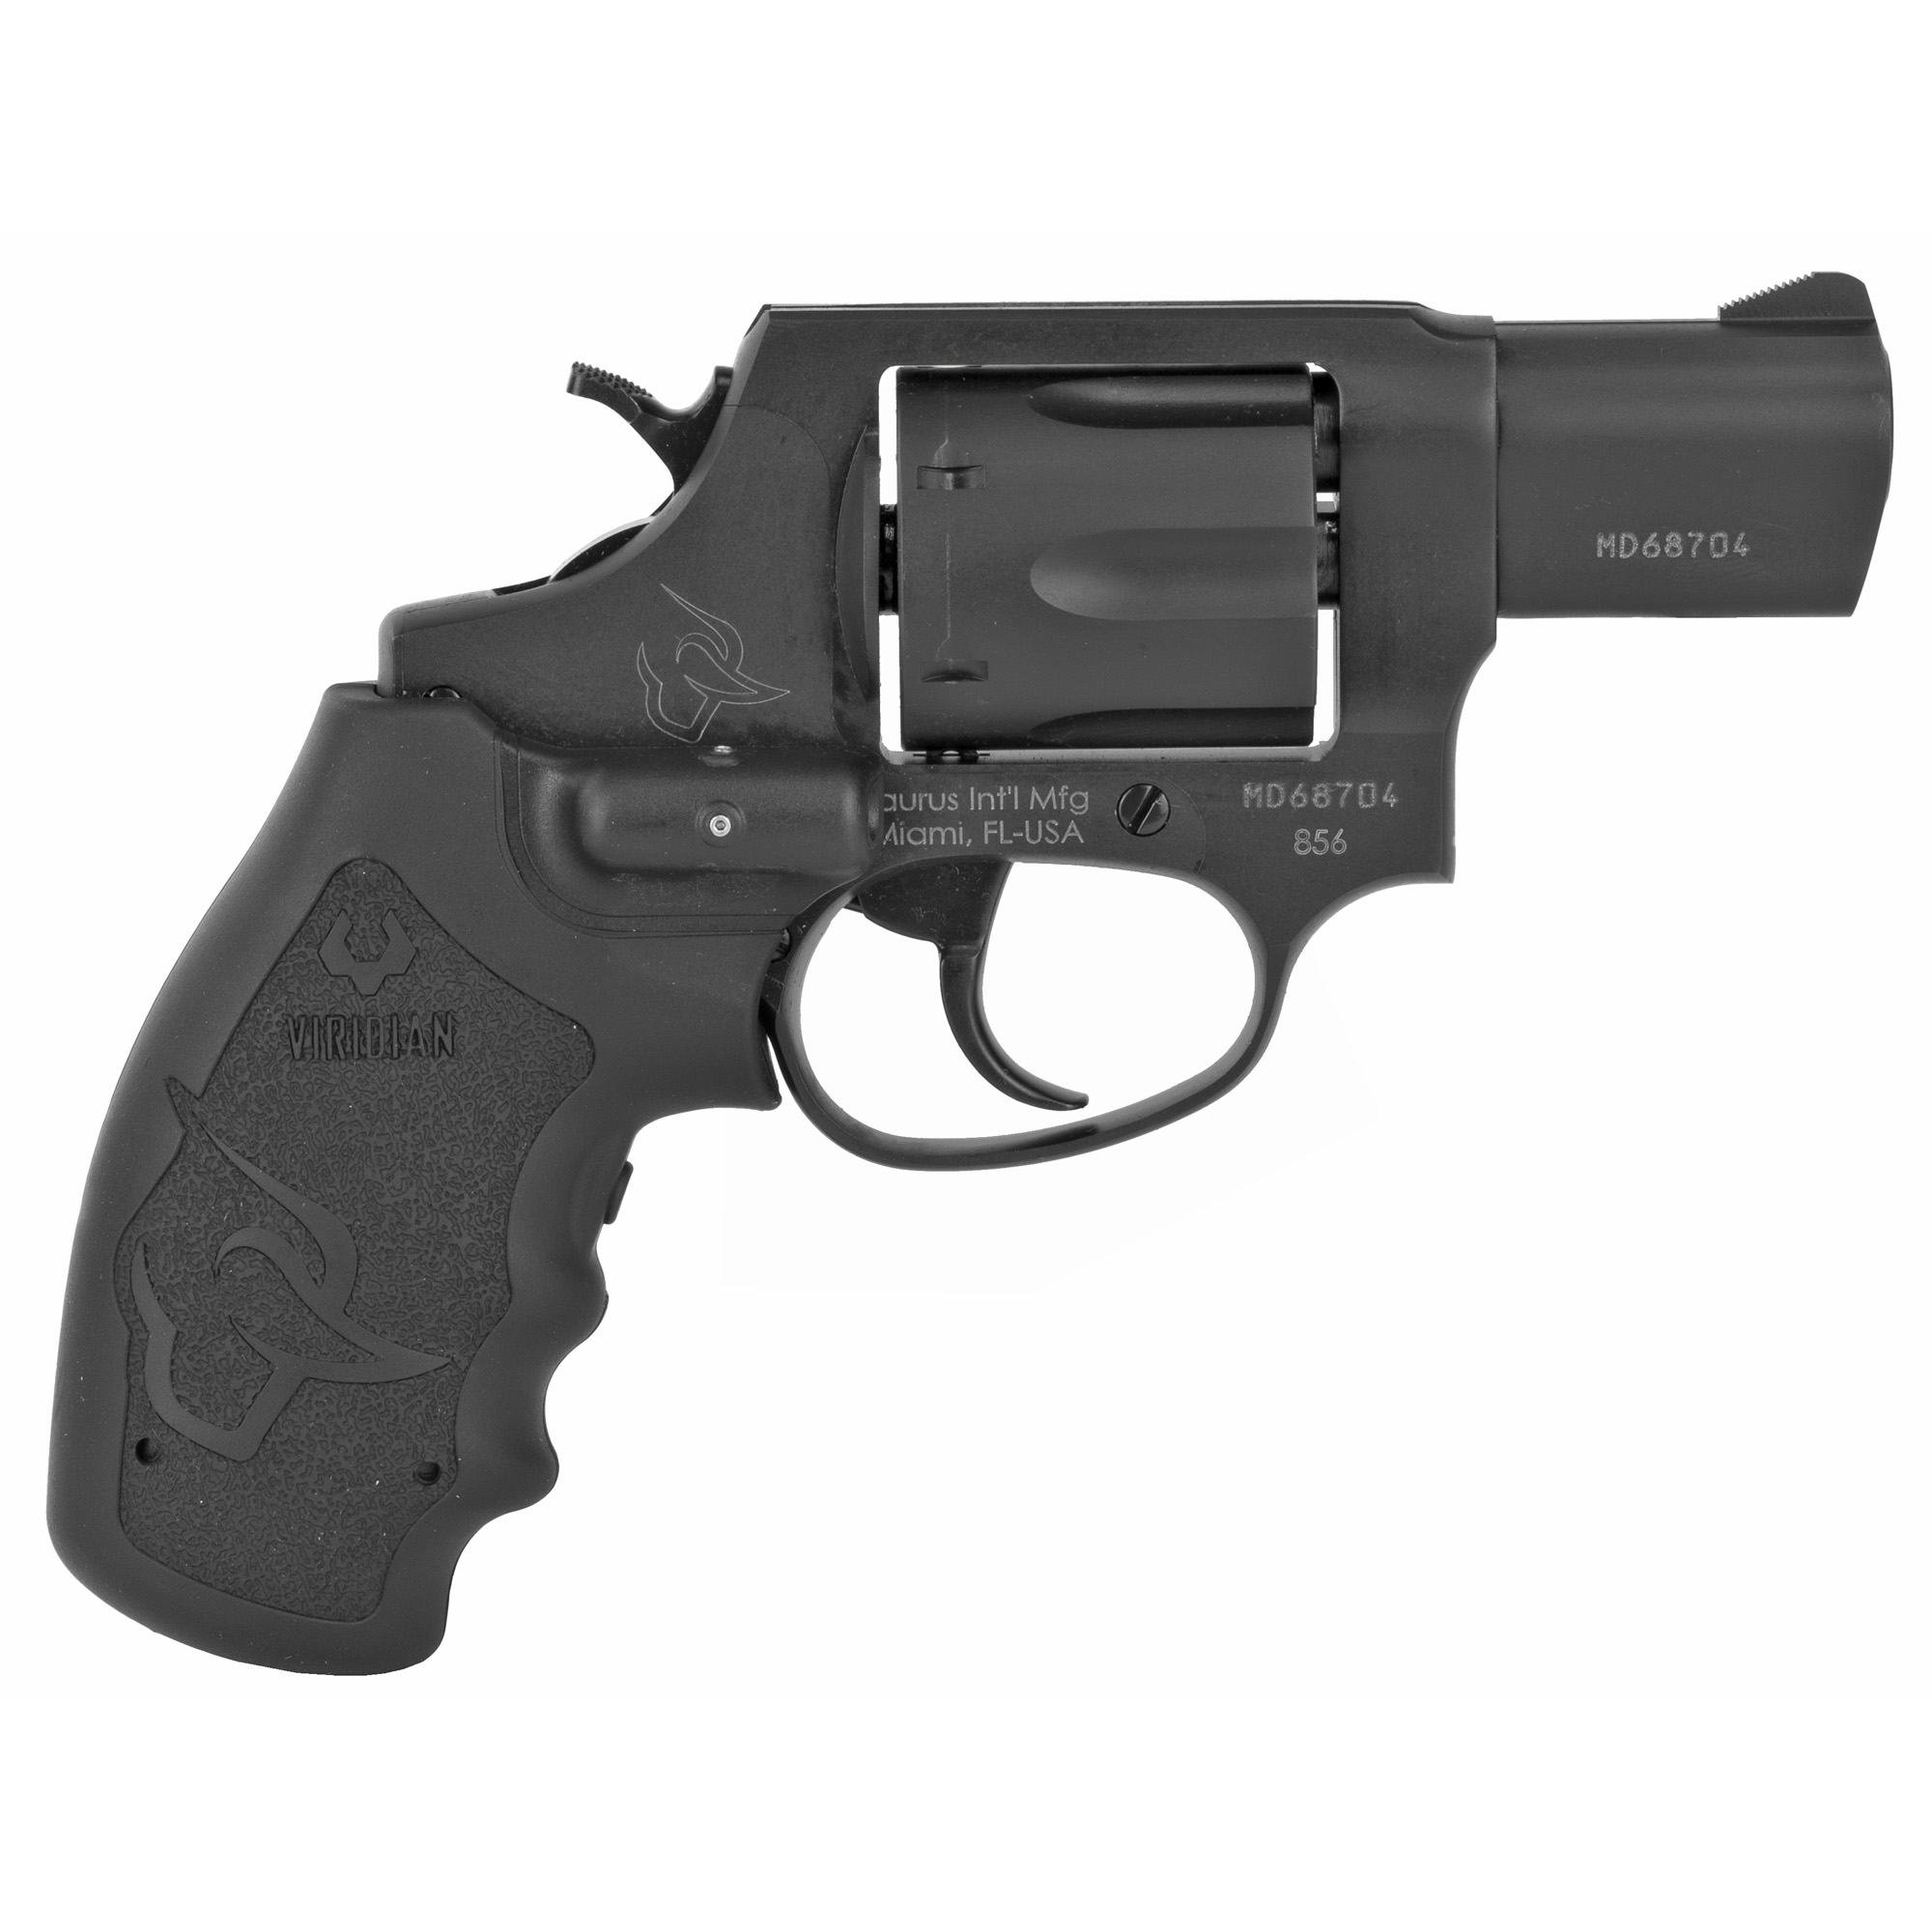 Taurus, Model 856VL, Double Action, Metal Frame Revolver, Small Frame, 38 Special, 2" Barrel, Steel, Matte Finish, Black, Viridian Red Laser Grip, Fixed Sights, 6 Rounds